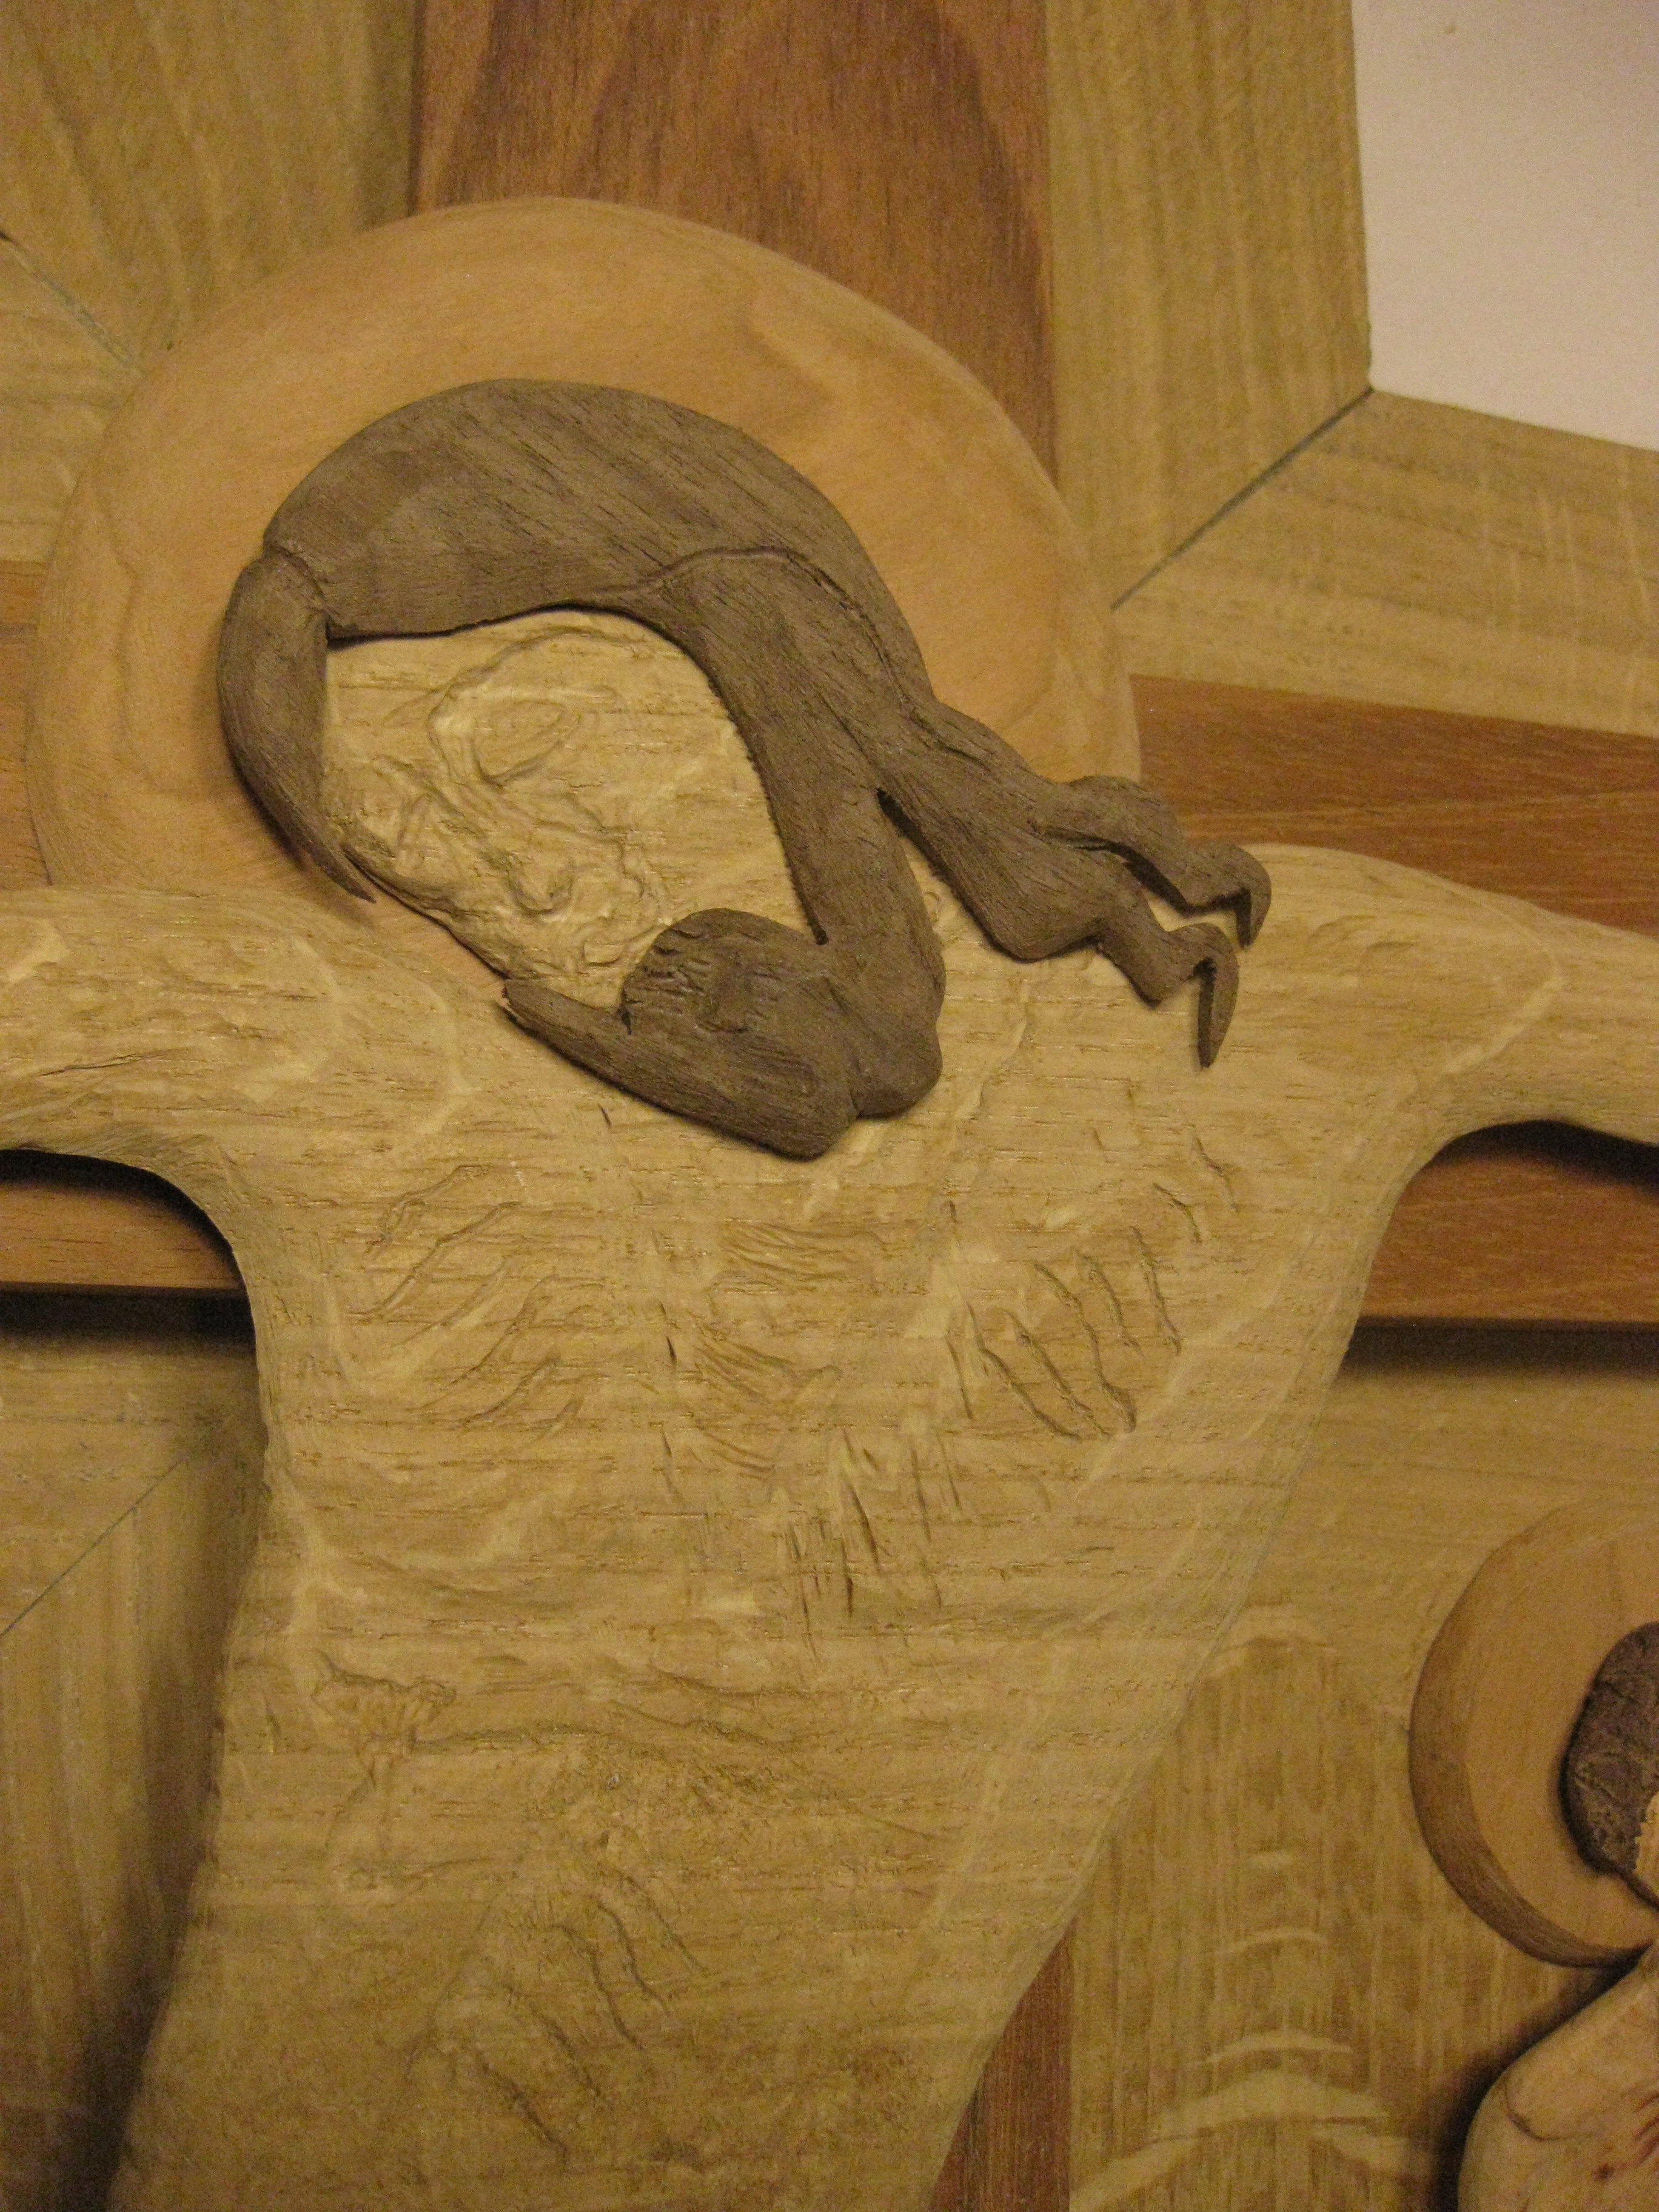 initial carving of Jesus face